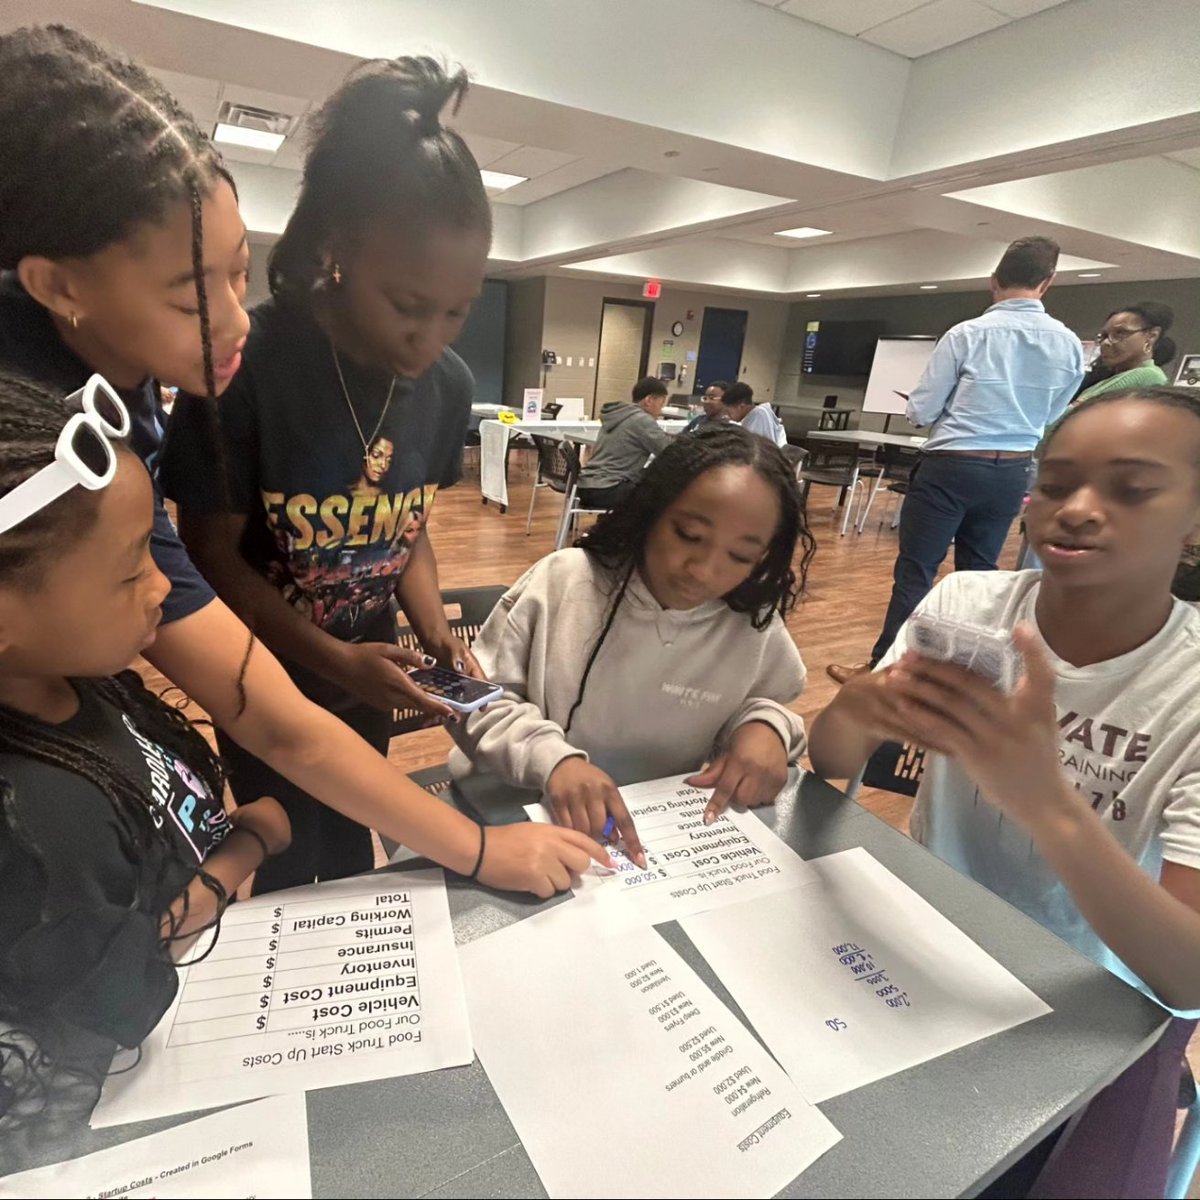 Get ready world... Our 7th & 8th graders are future entrepreneurs. They participated in a Food Truck Pitch activity. They designed their menus, discussed the financials/startup costs, & developed a pitch to start their business. The winning pitch! Cinncerely Cinnamon Buns.